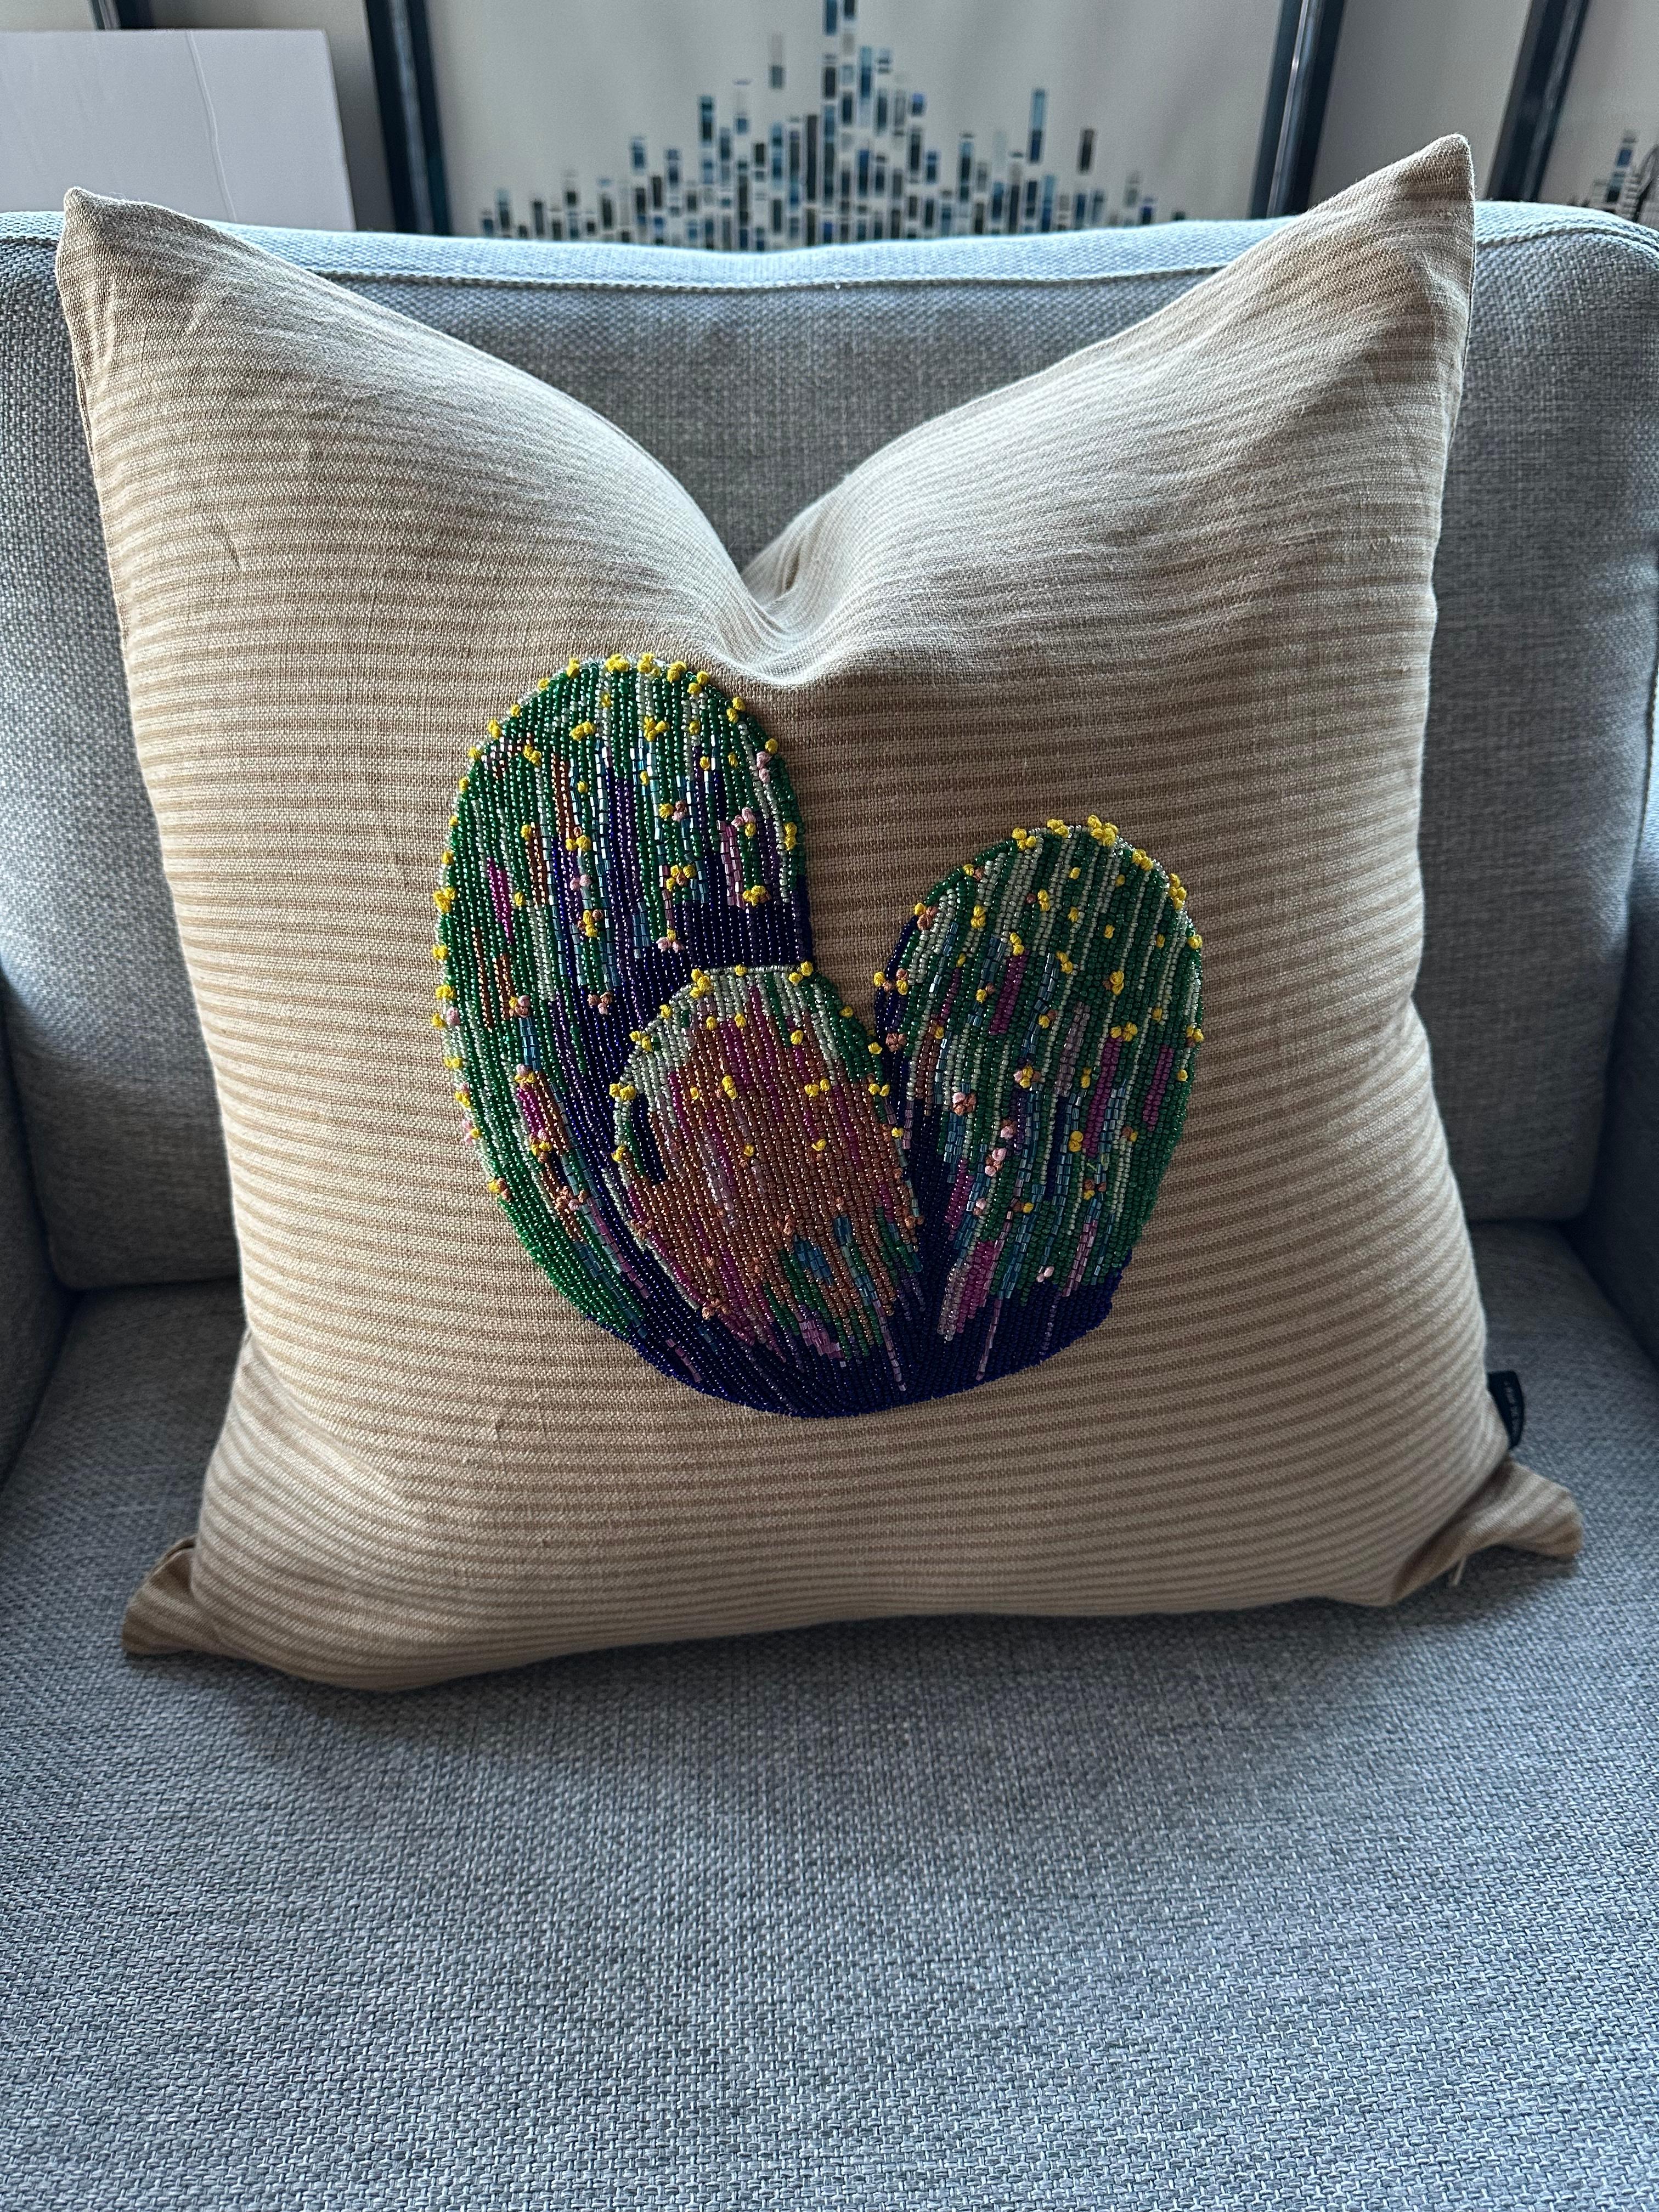 Appliqué Imported Linen with hand embroidered applique - CACTUS by Mar de Doce For Sale